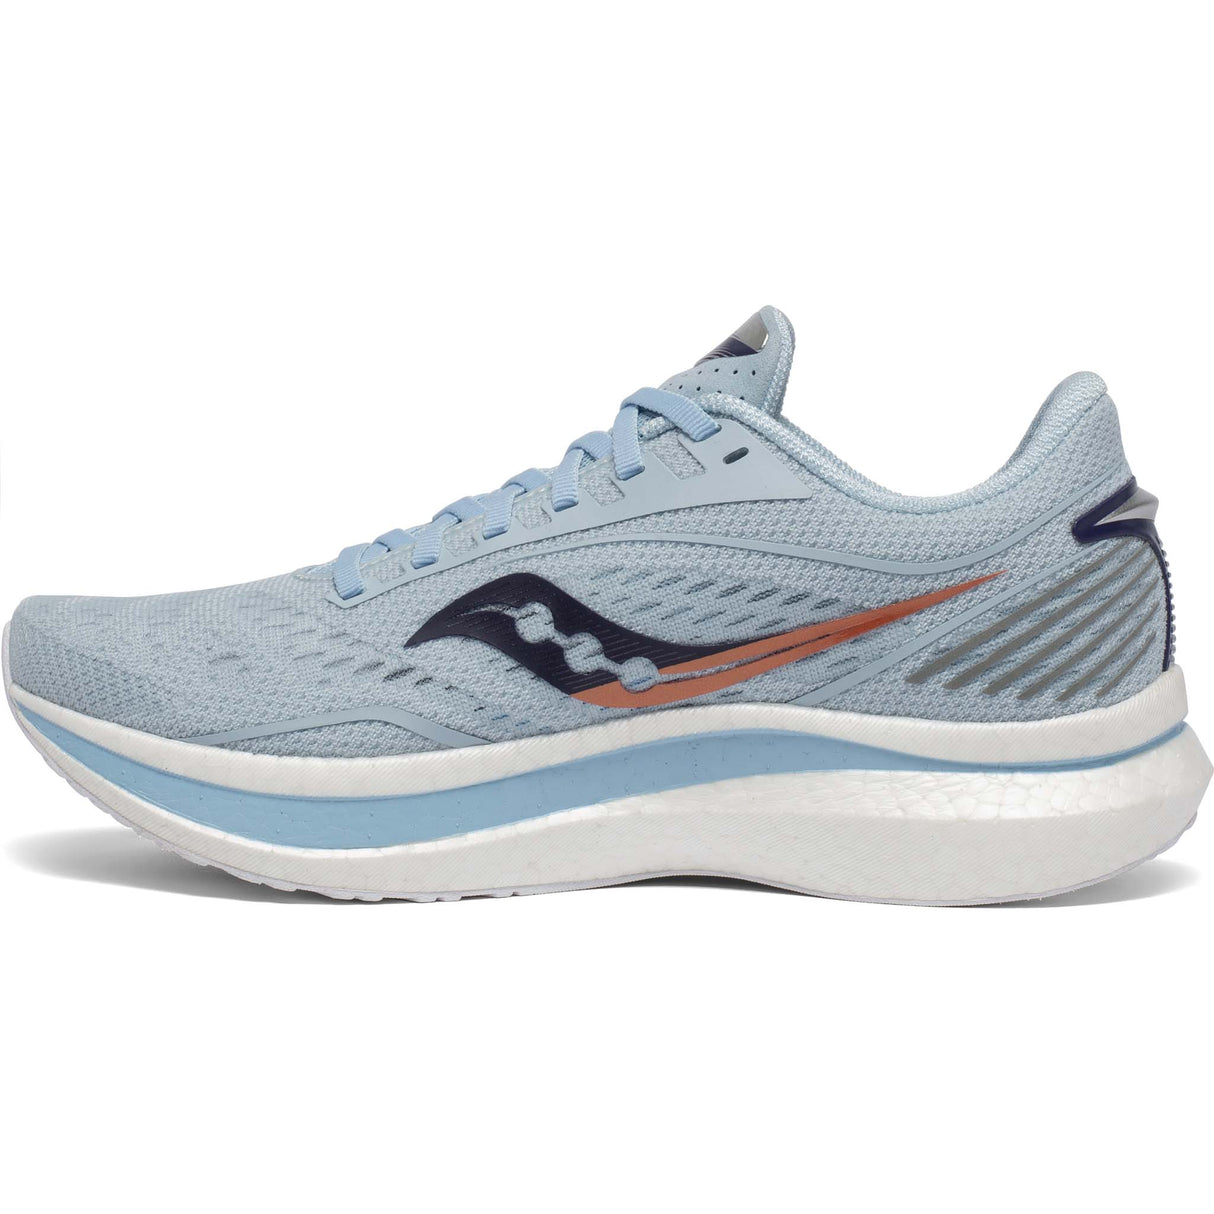 Saucony Endorphin Speed sky midnight souliers de course femme lateral